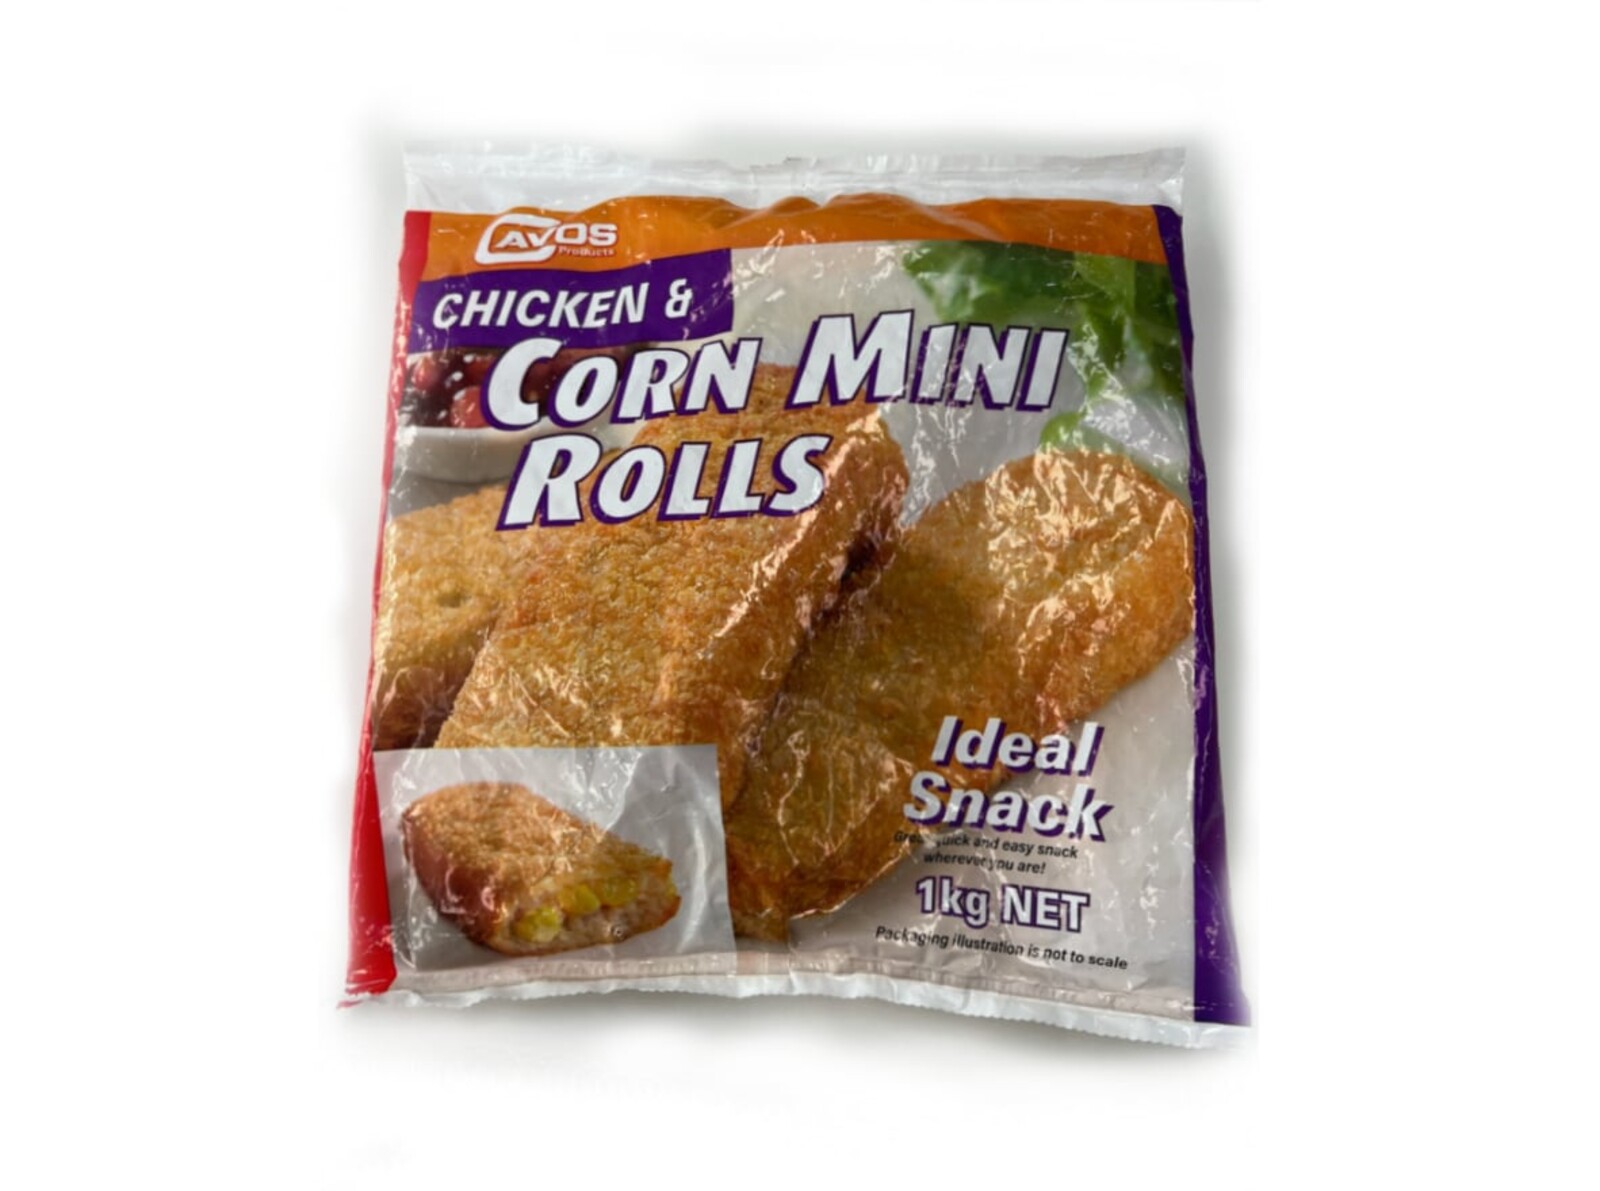 Cavos Products Chicken & Corn Roll 